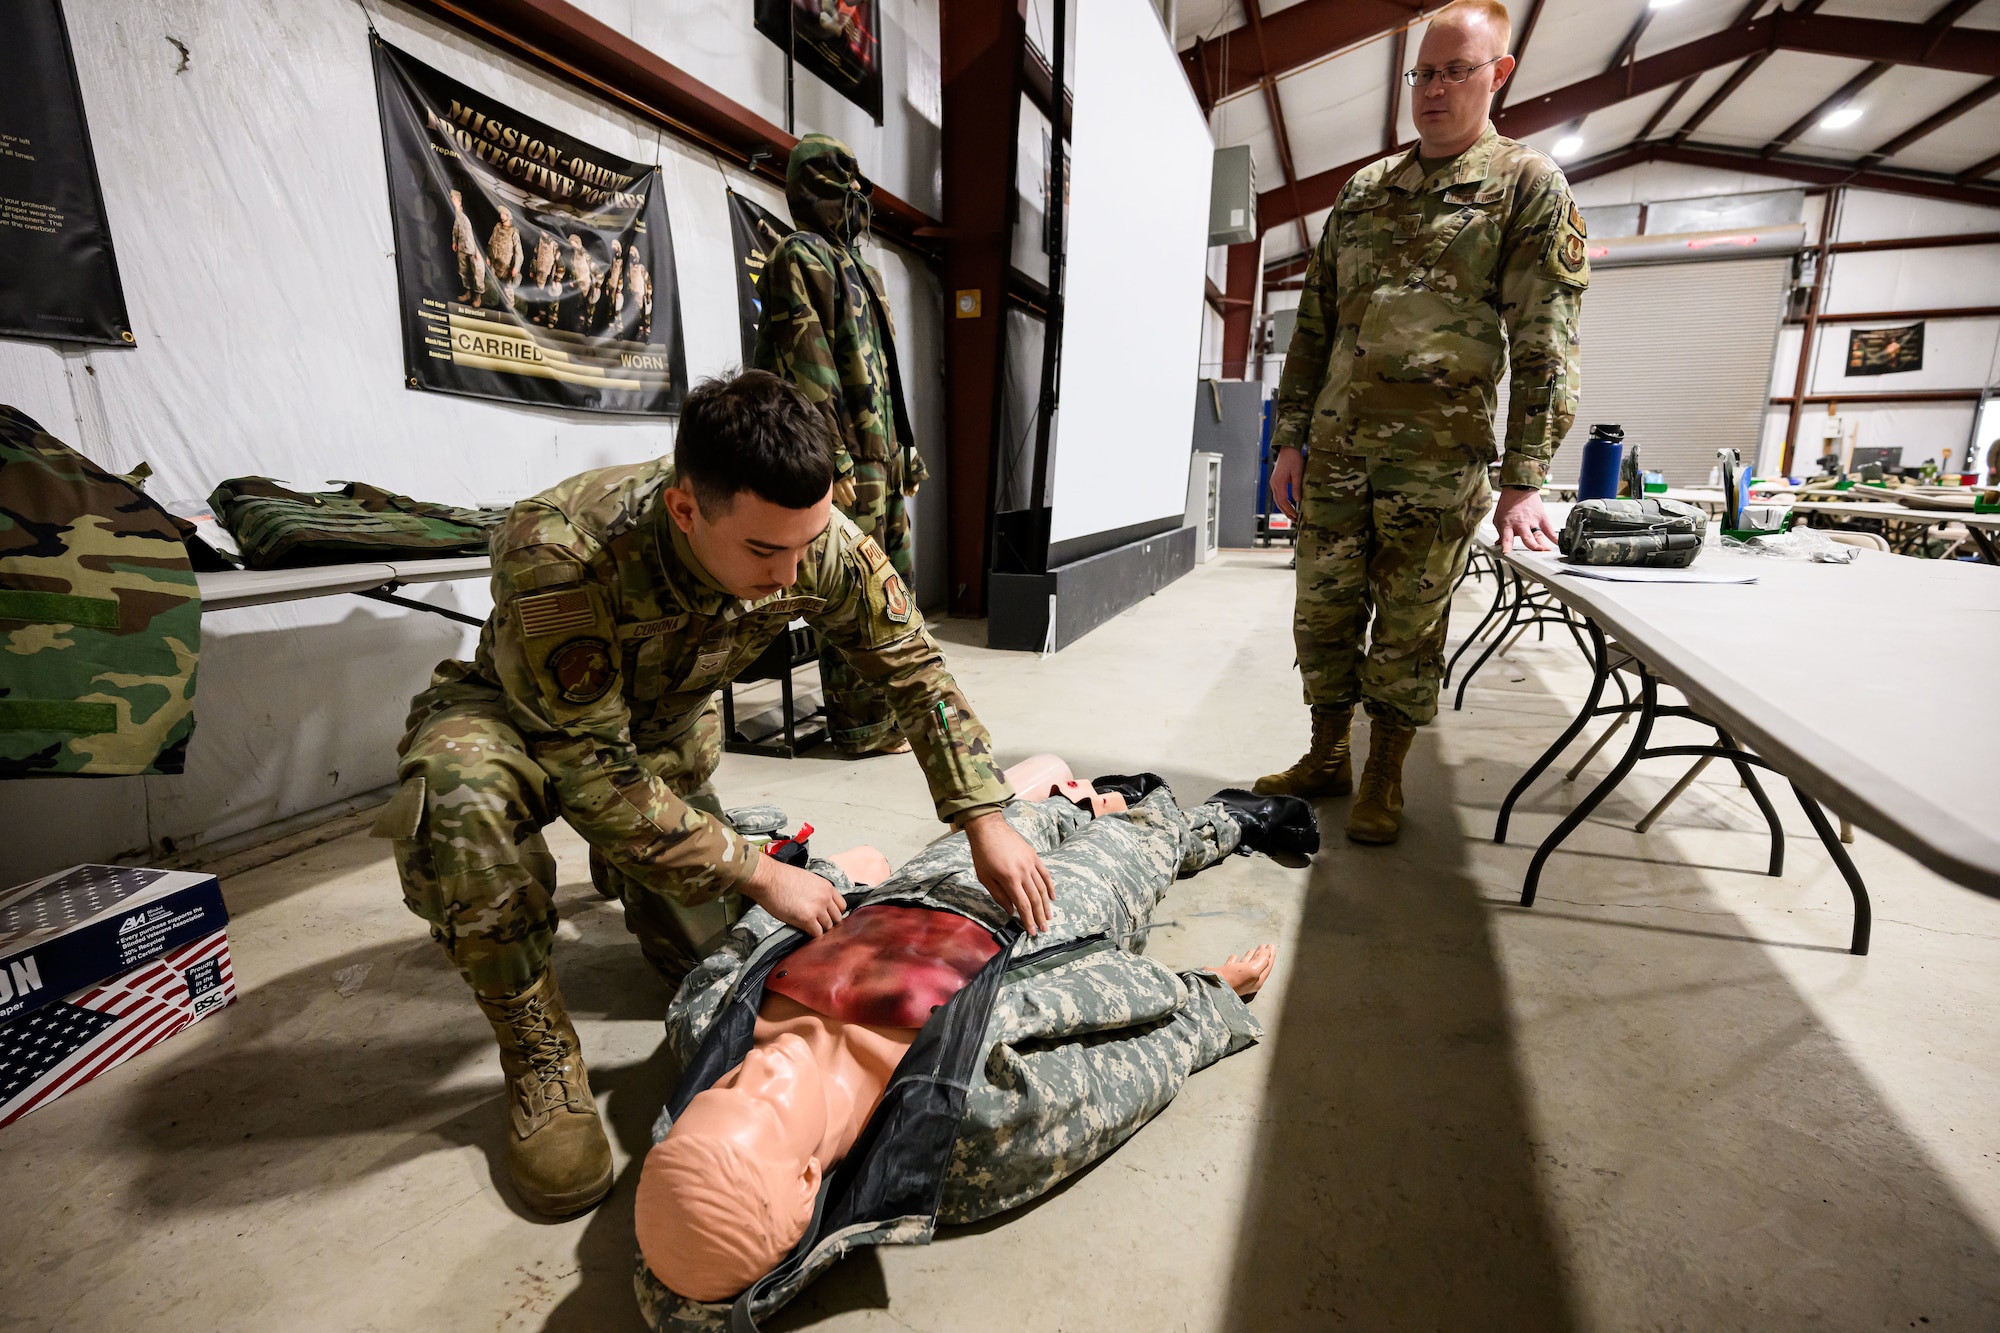 An Airman works on a lifelike training aide with an instructor standing behind